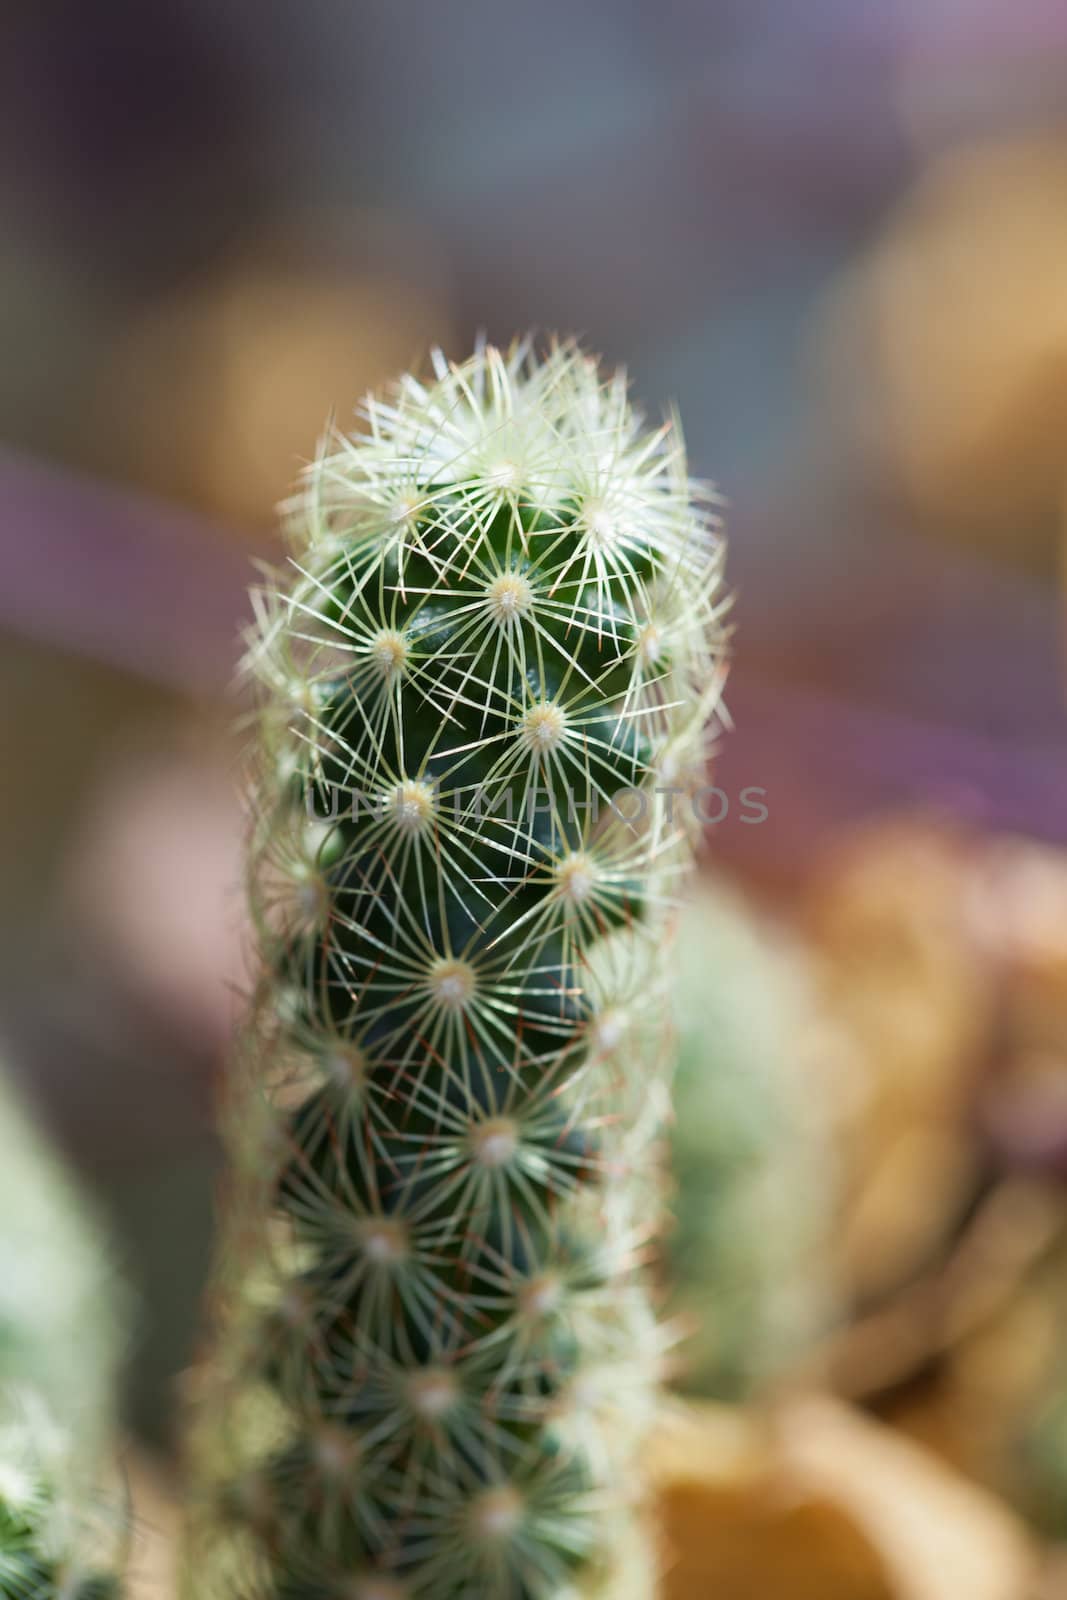 close-up of some small cacti